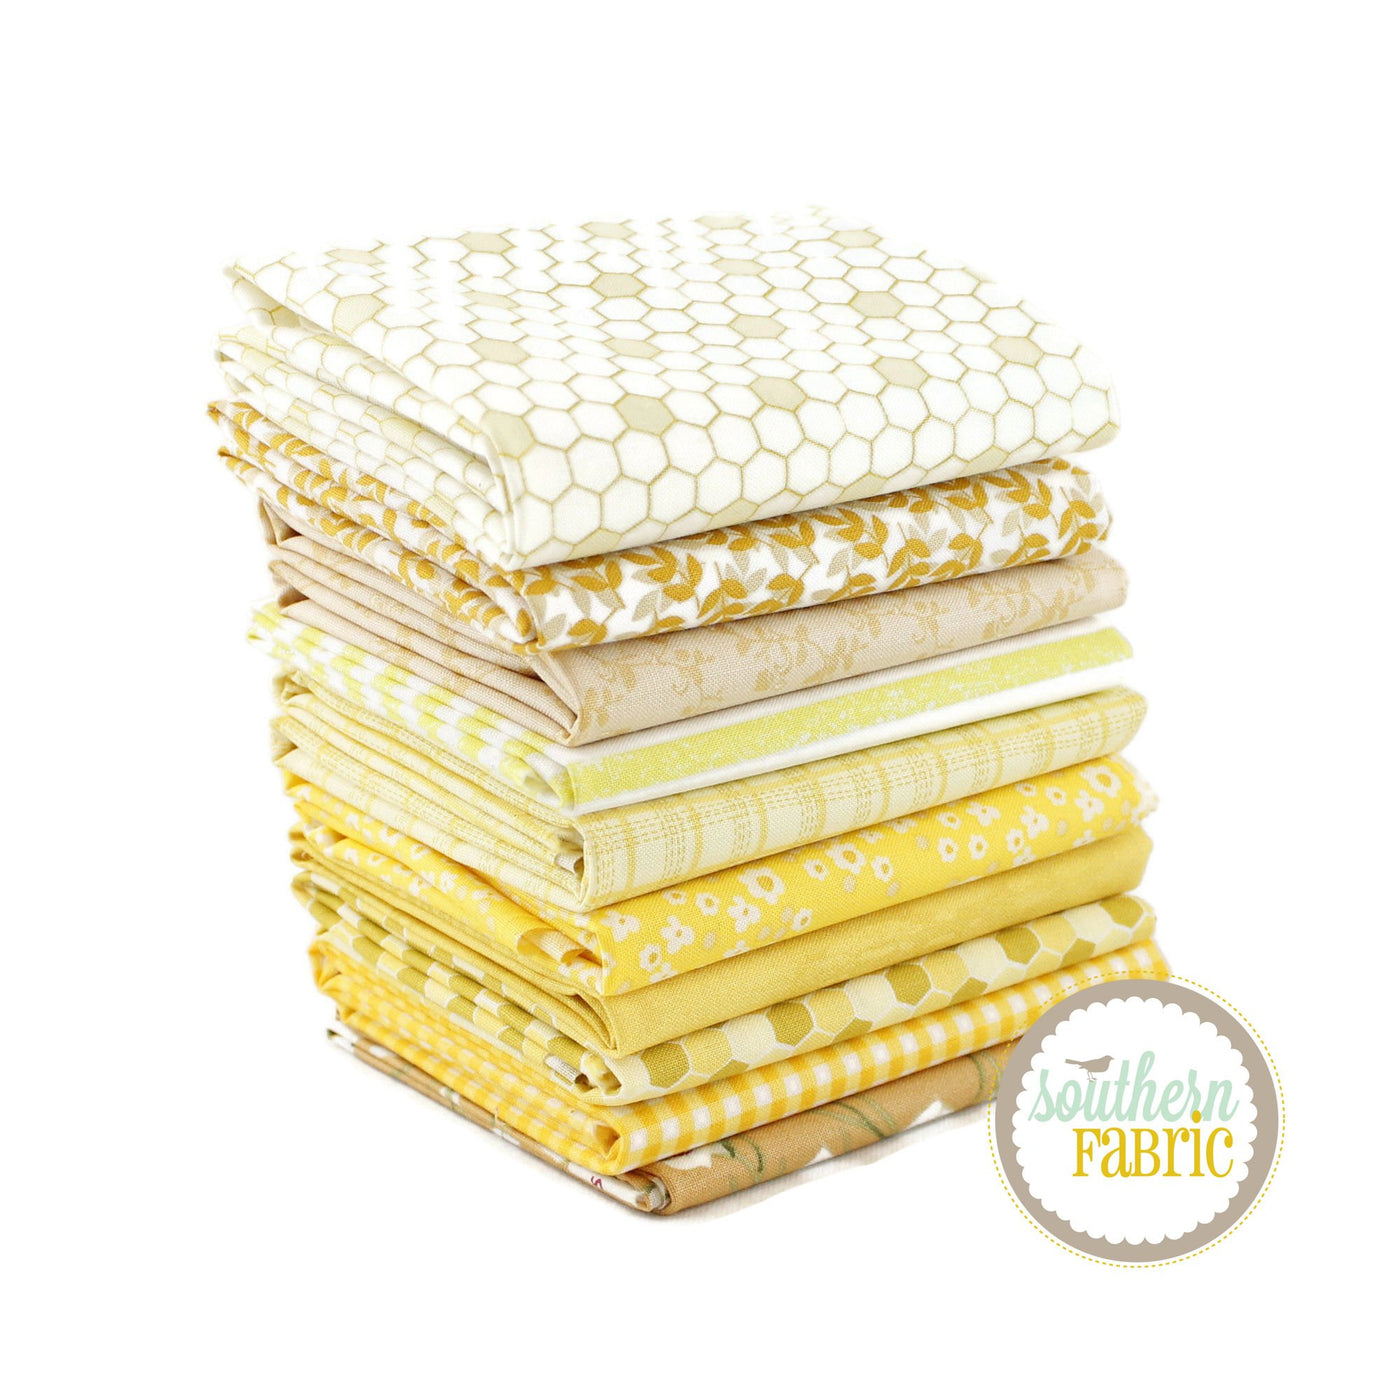 Yellow Half Yard Bundle (10 pcs) by Mixed Designers for Southern Fabric